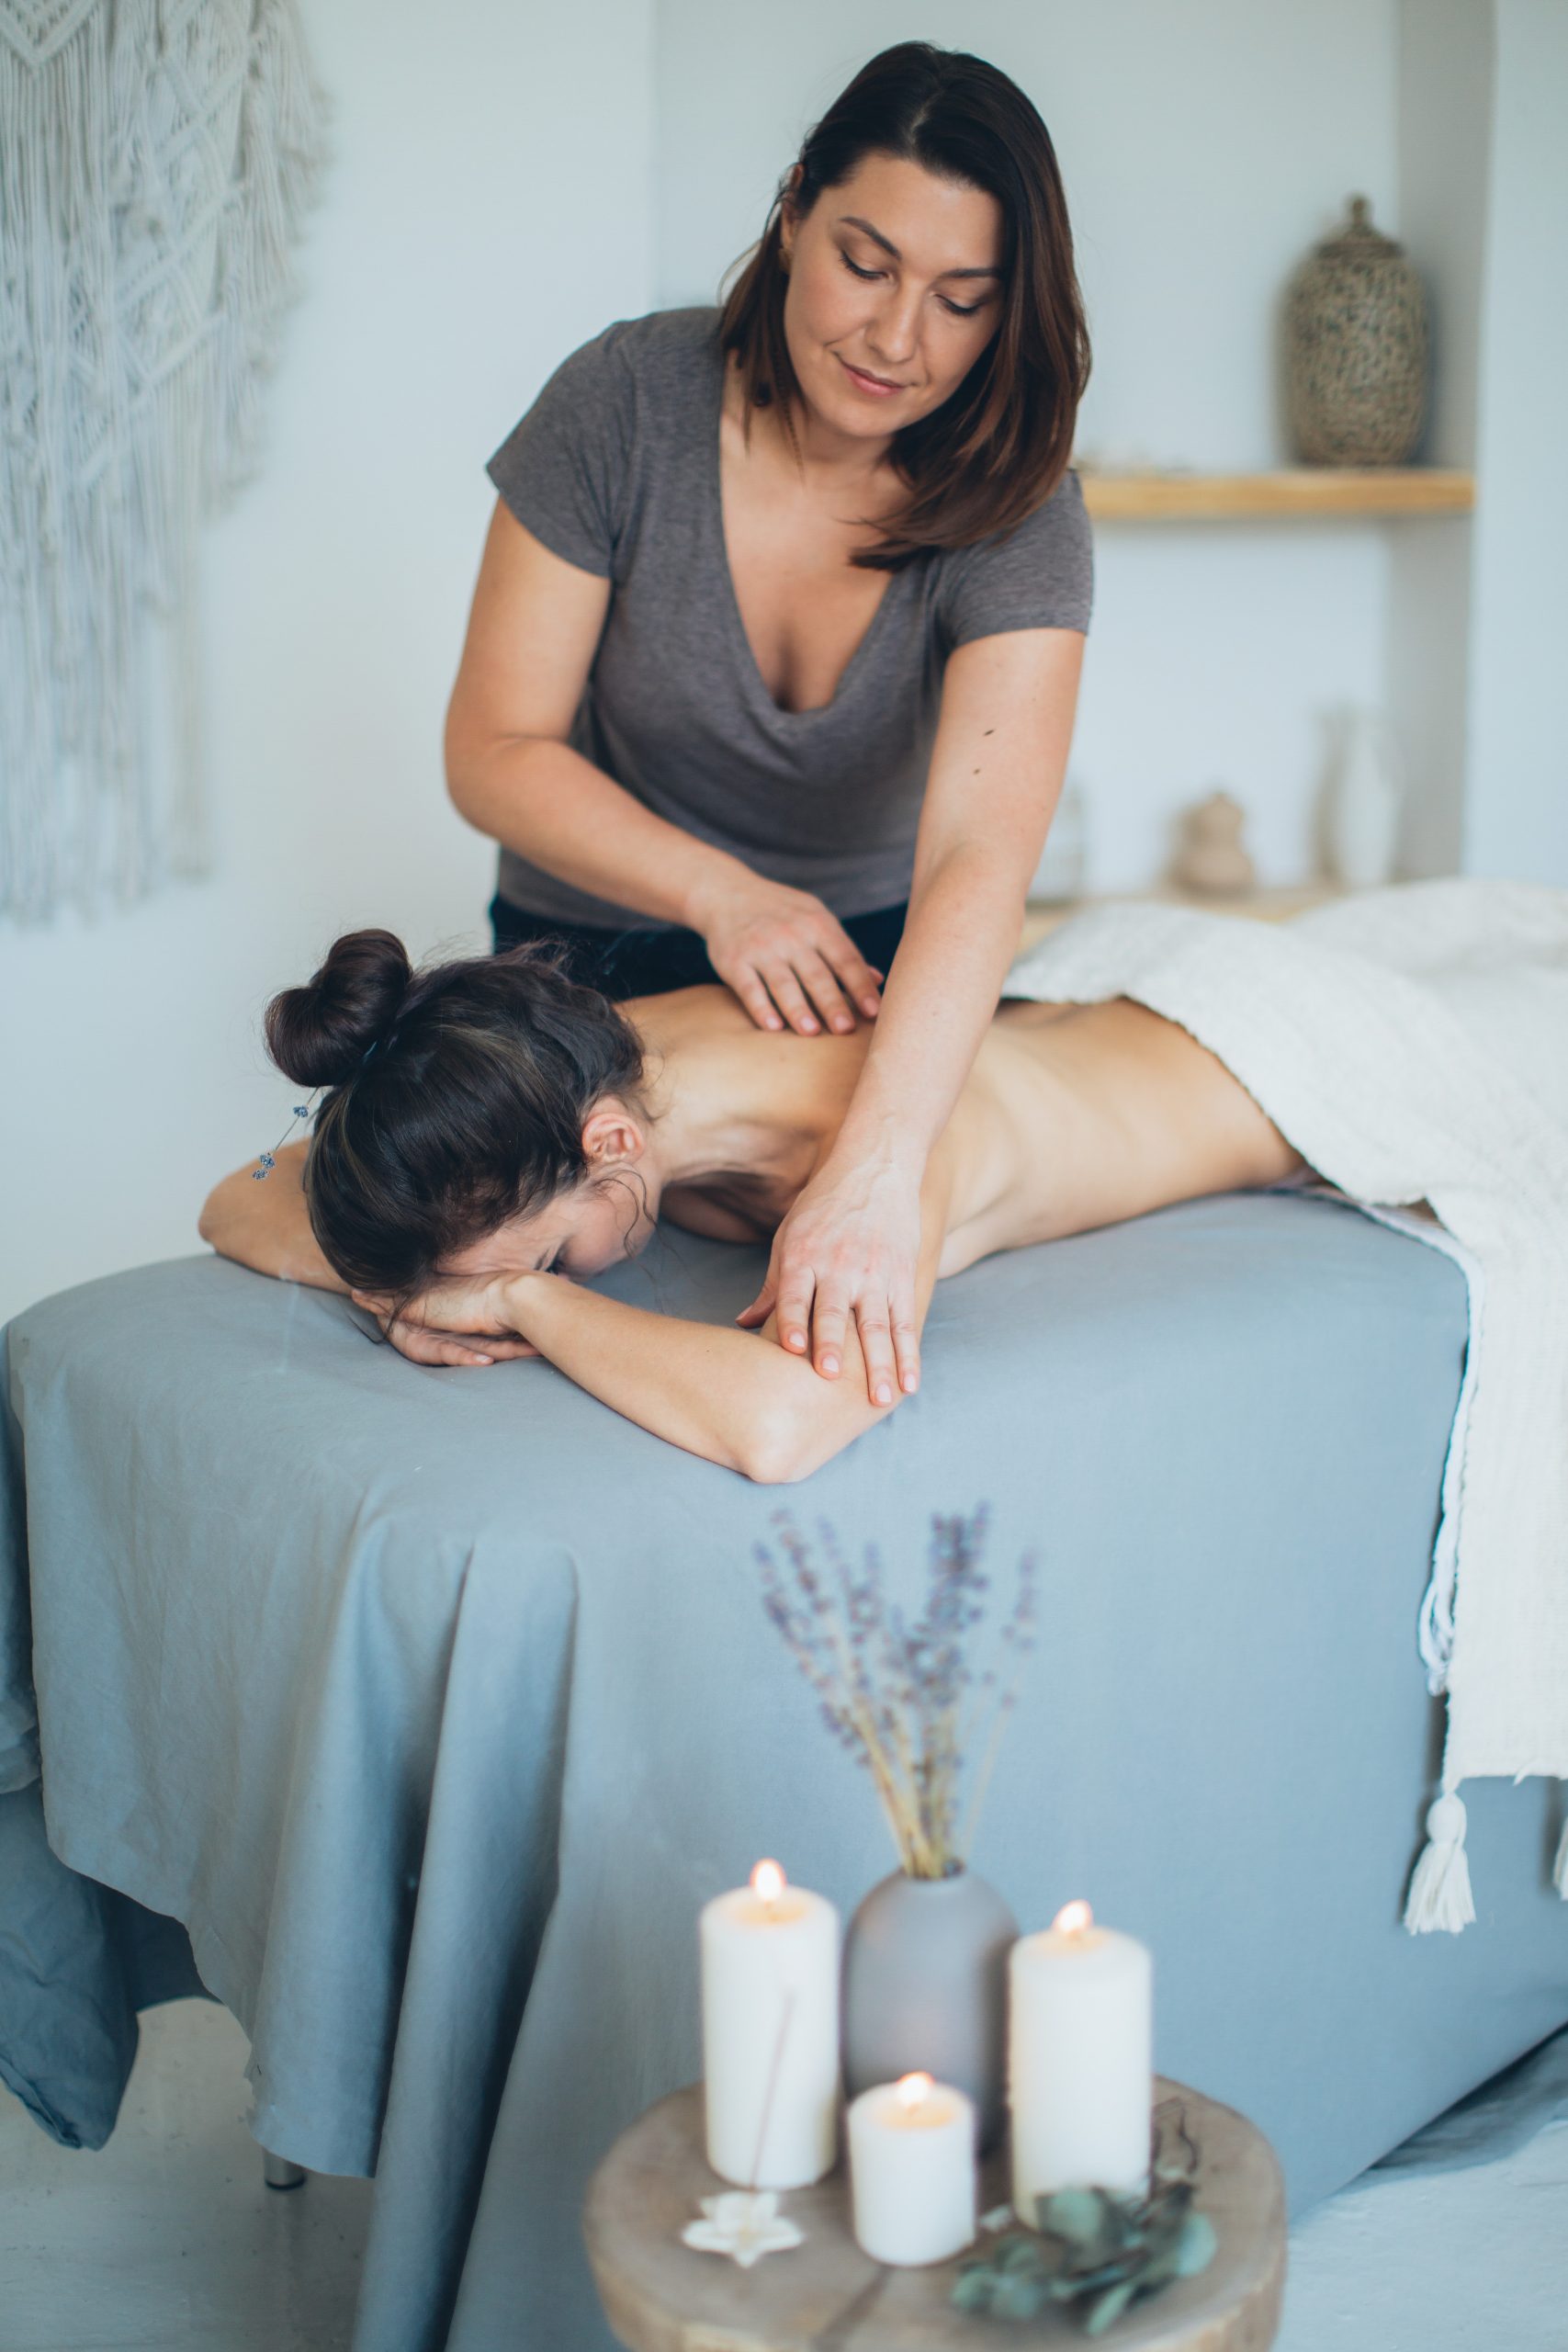 Ways to Find a Competent Massage Therapist when Traveling